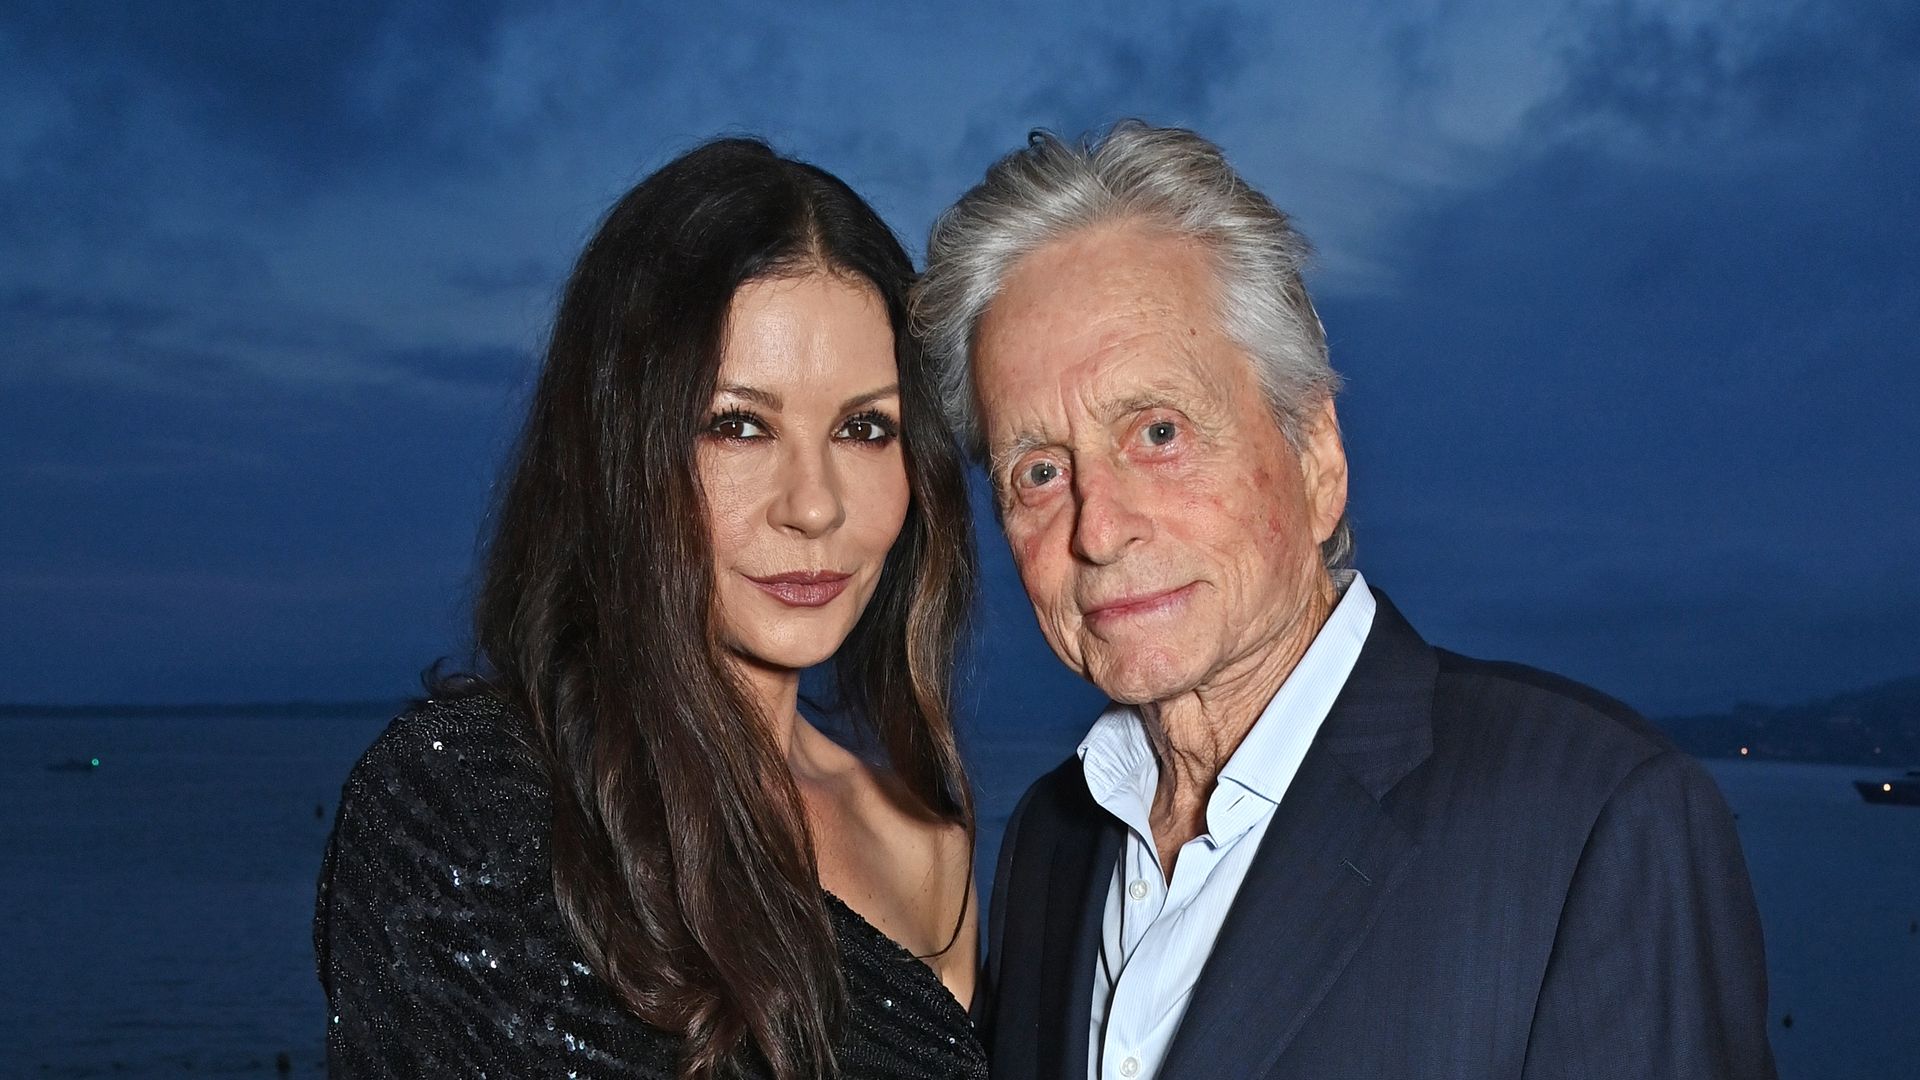 Catherine Zeta-Jones and Michael Douglas attend the launch of the new Aston Martin DB12 at the Hotel du Cap-Eden-Roc in Antibes on May 24, 2023 in Cannes, France